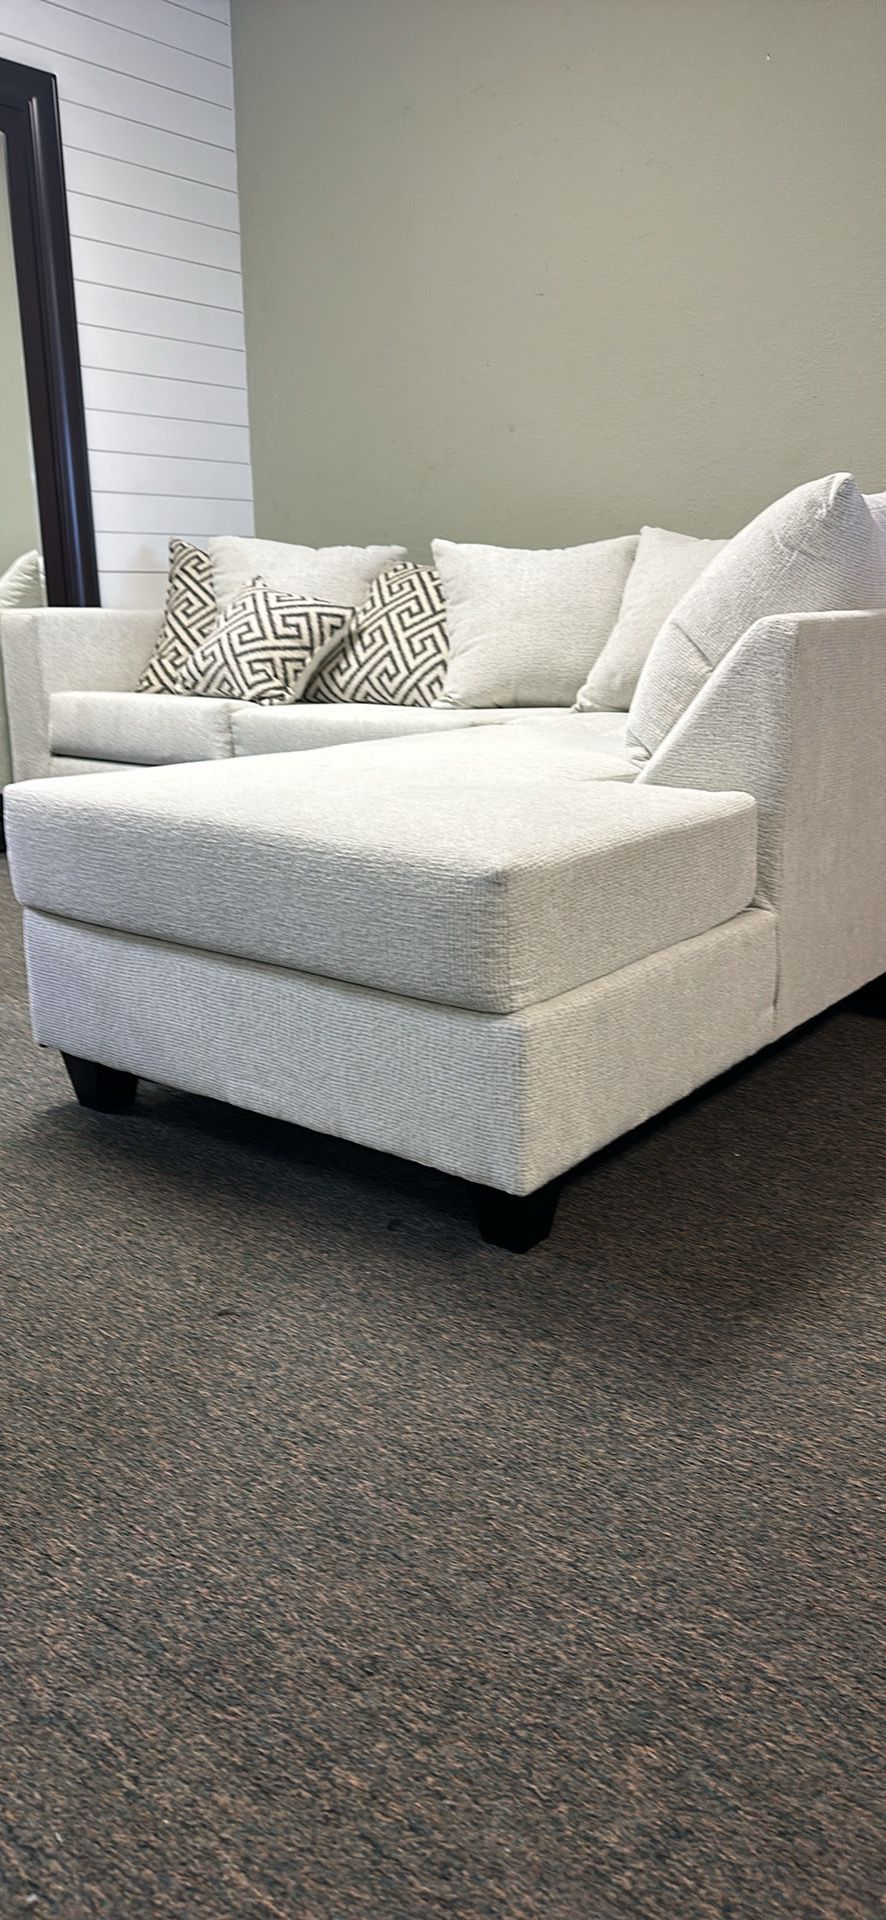 NEW SECTIONAL WITH FREE DELIVERY SPECIAL FINANCING IS AVAILABLE $40 Down